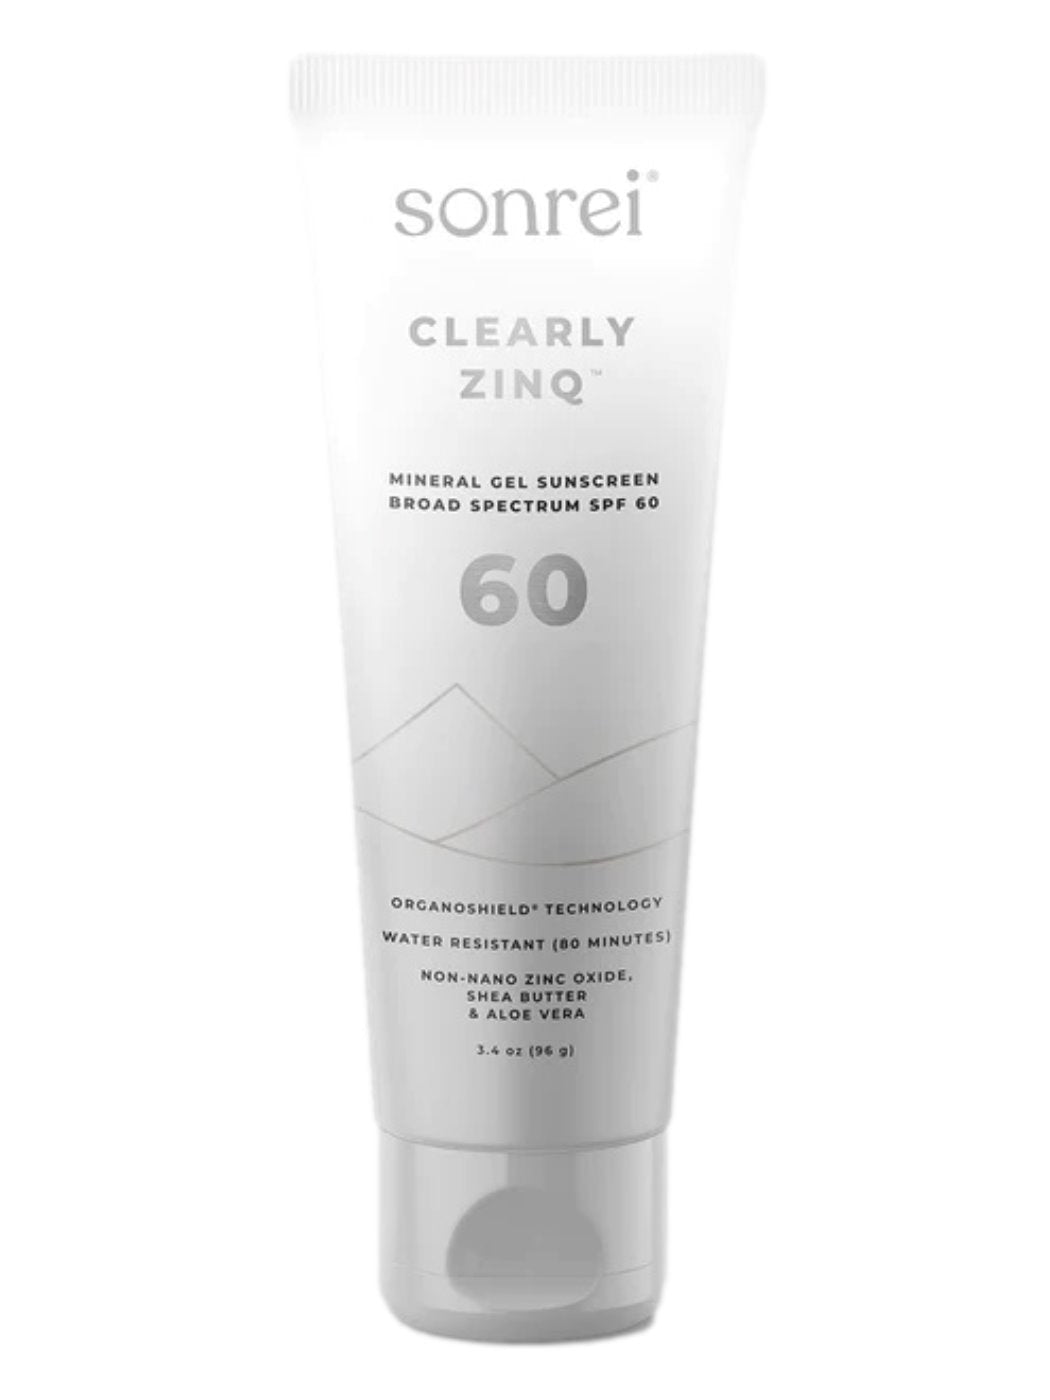 Sonrei Clearly Zinq Mineral Gel Sunscreen SPF 60 Skin Type Solutions 3.4 oz. Shop Skin Type Solutions